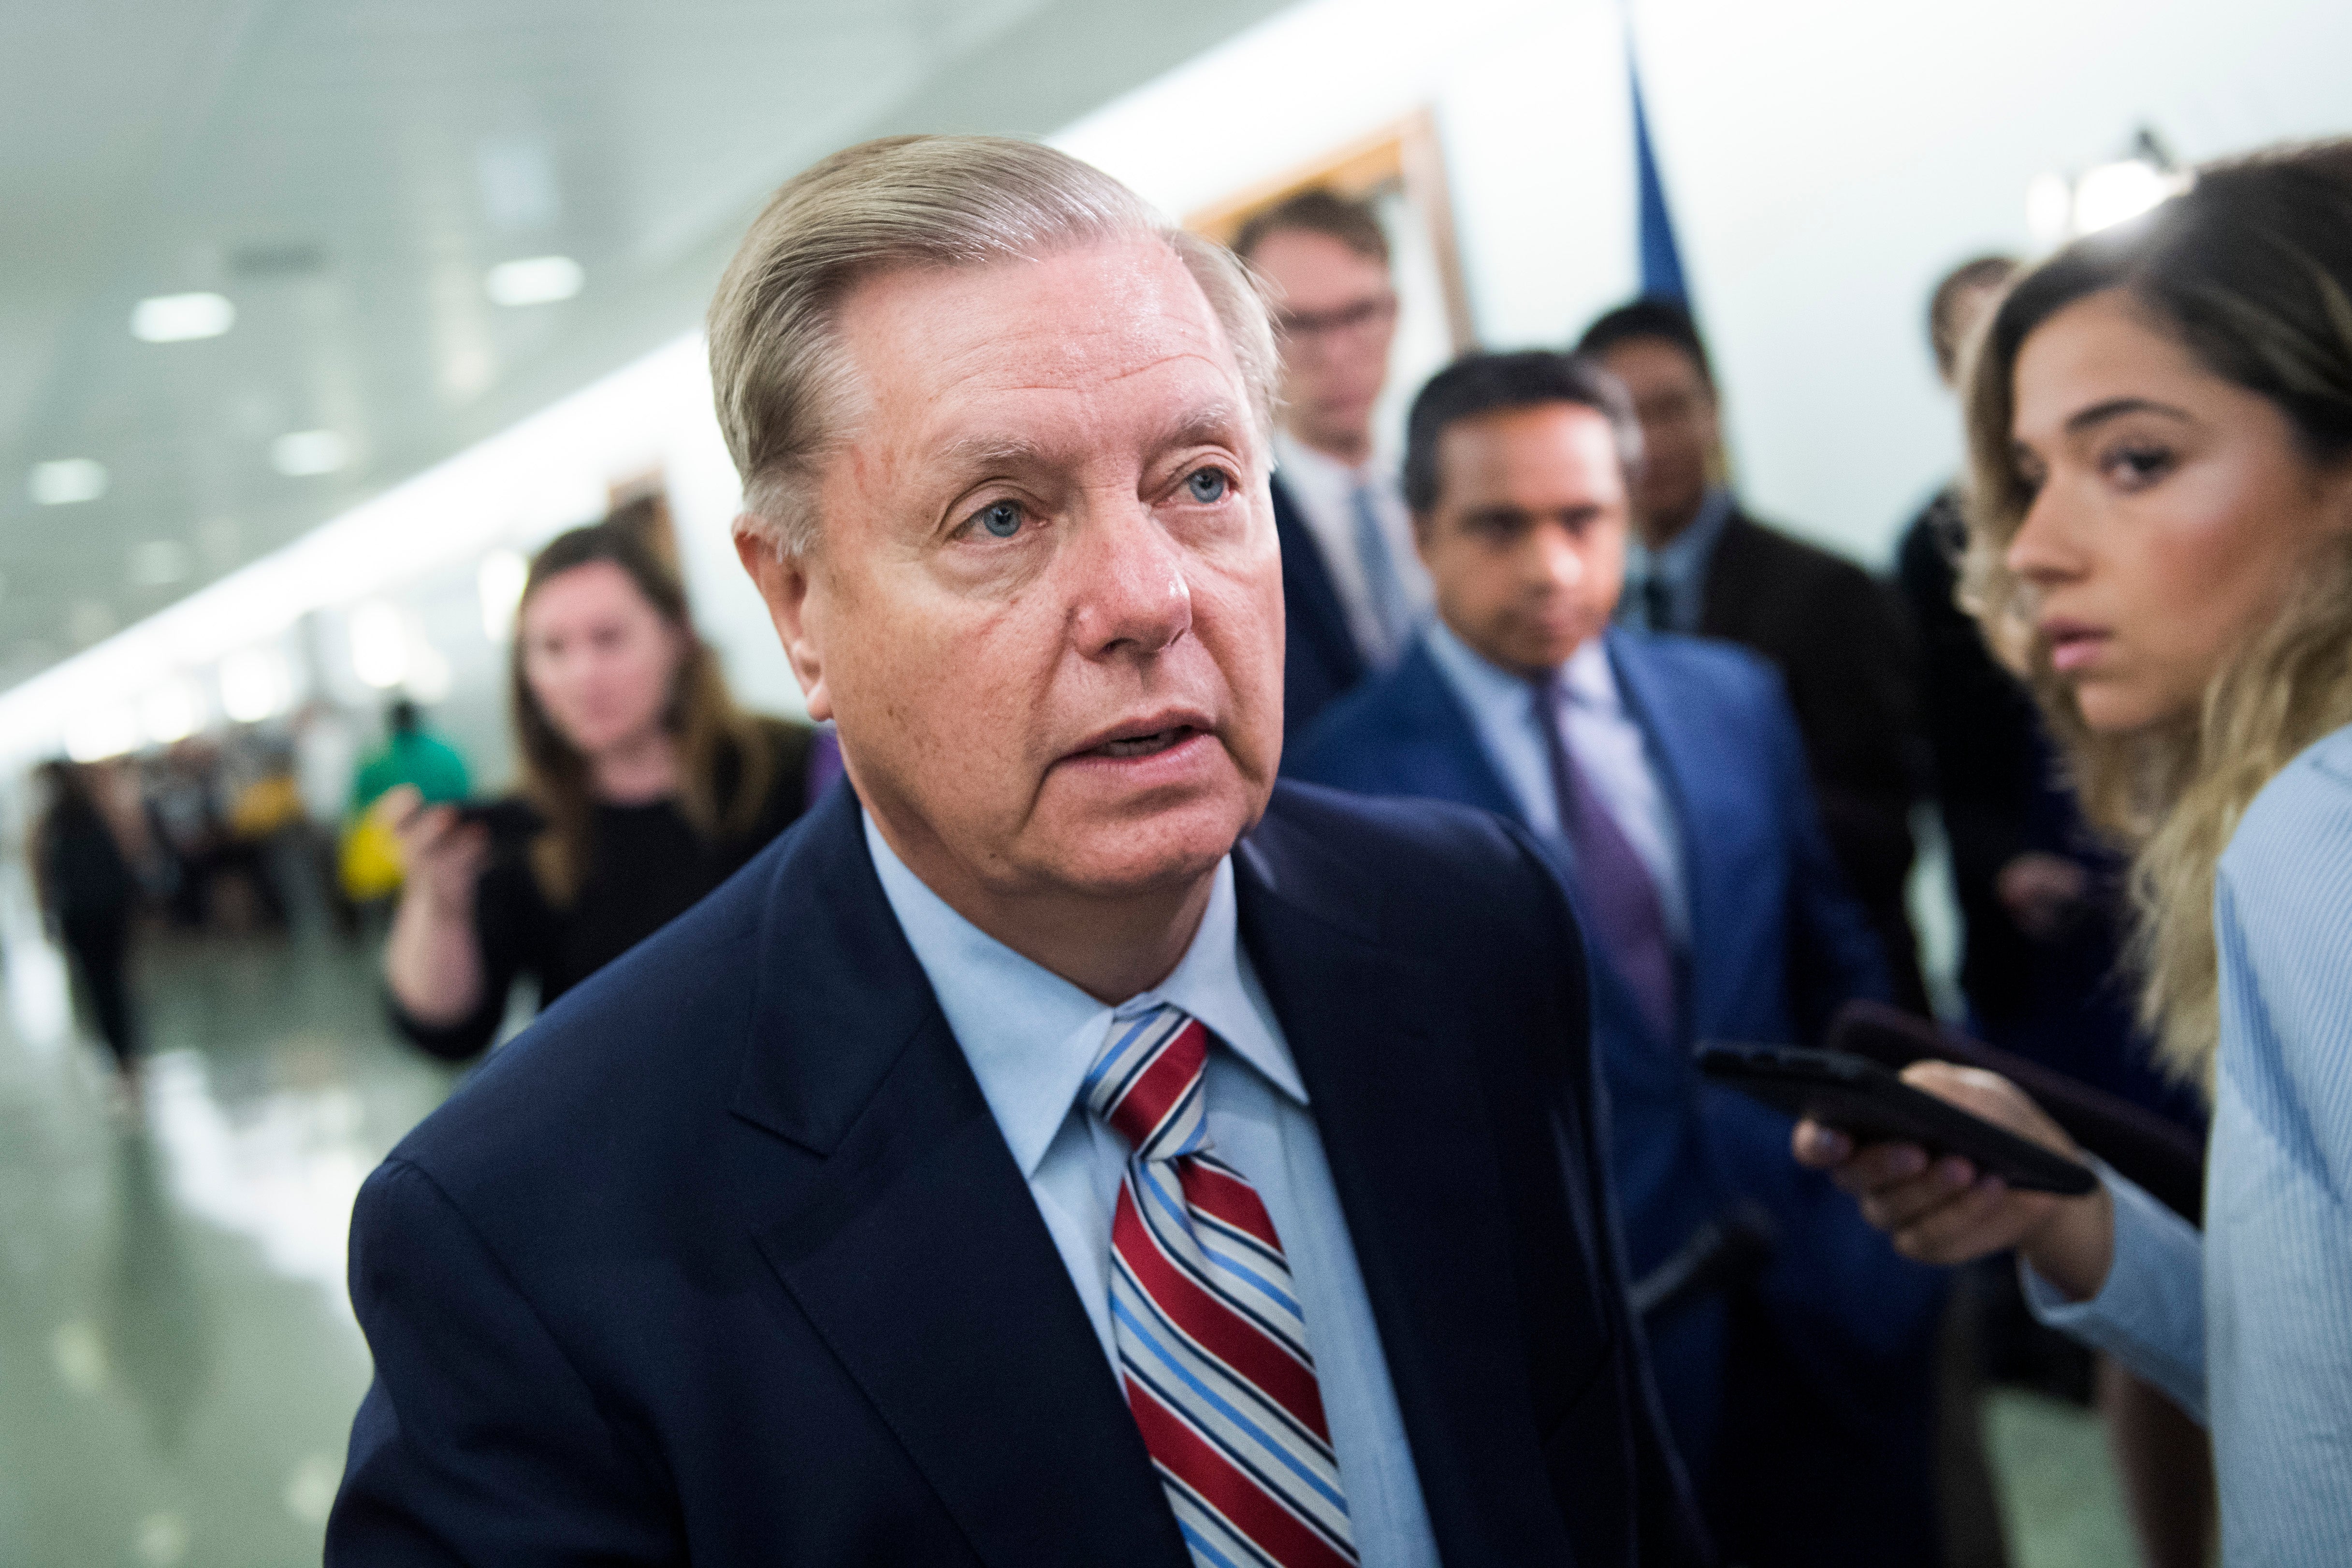 Lindsey Graham Says He'll Out Whistleblowers If Trump Is Impeached